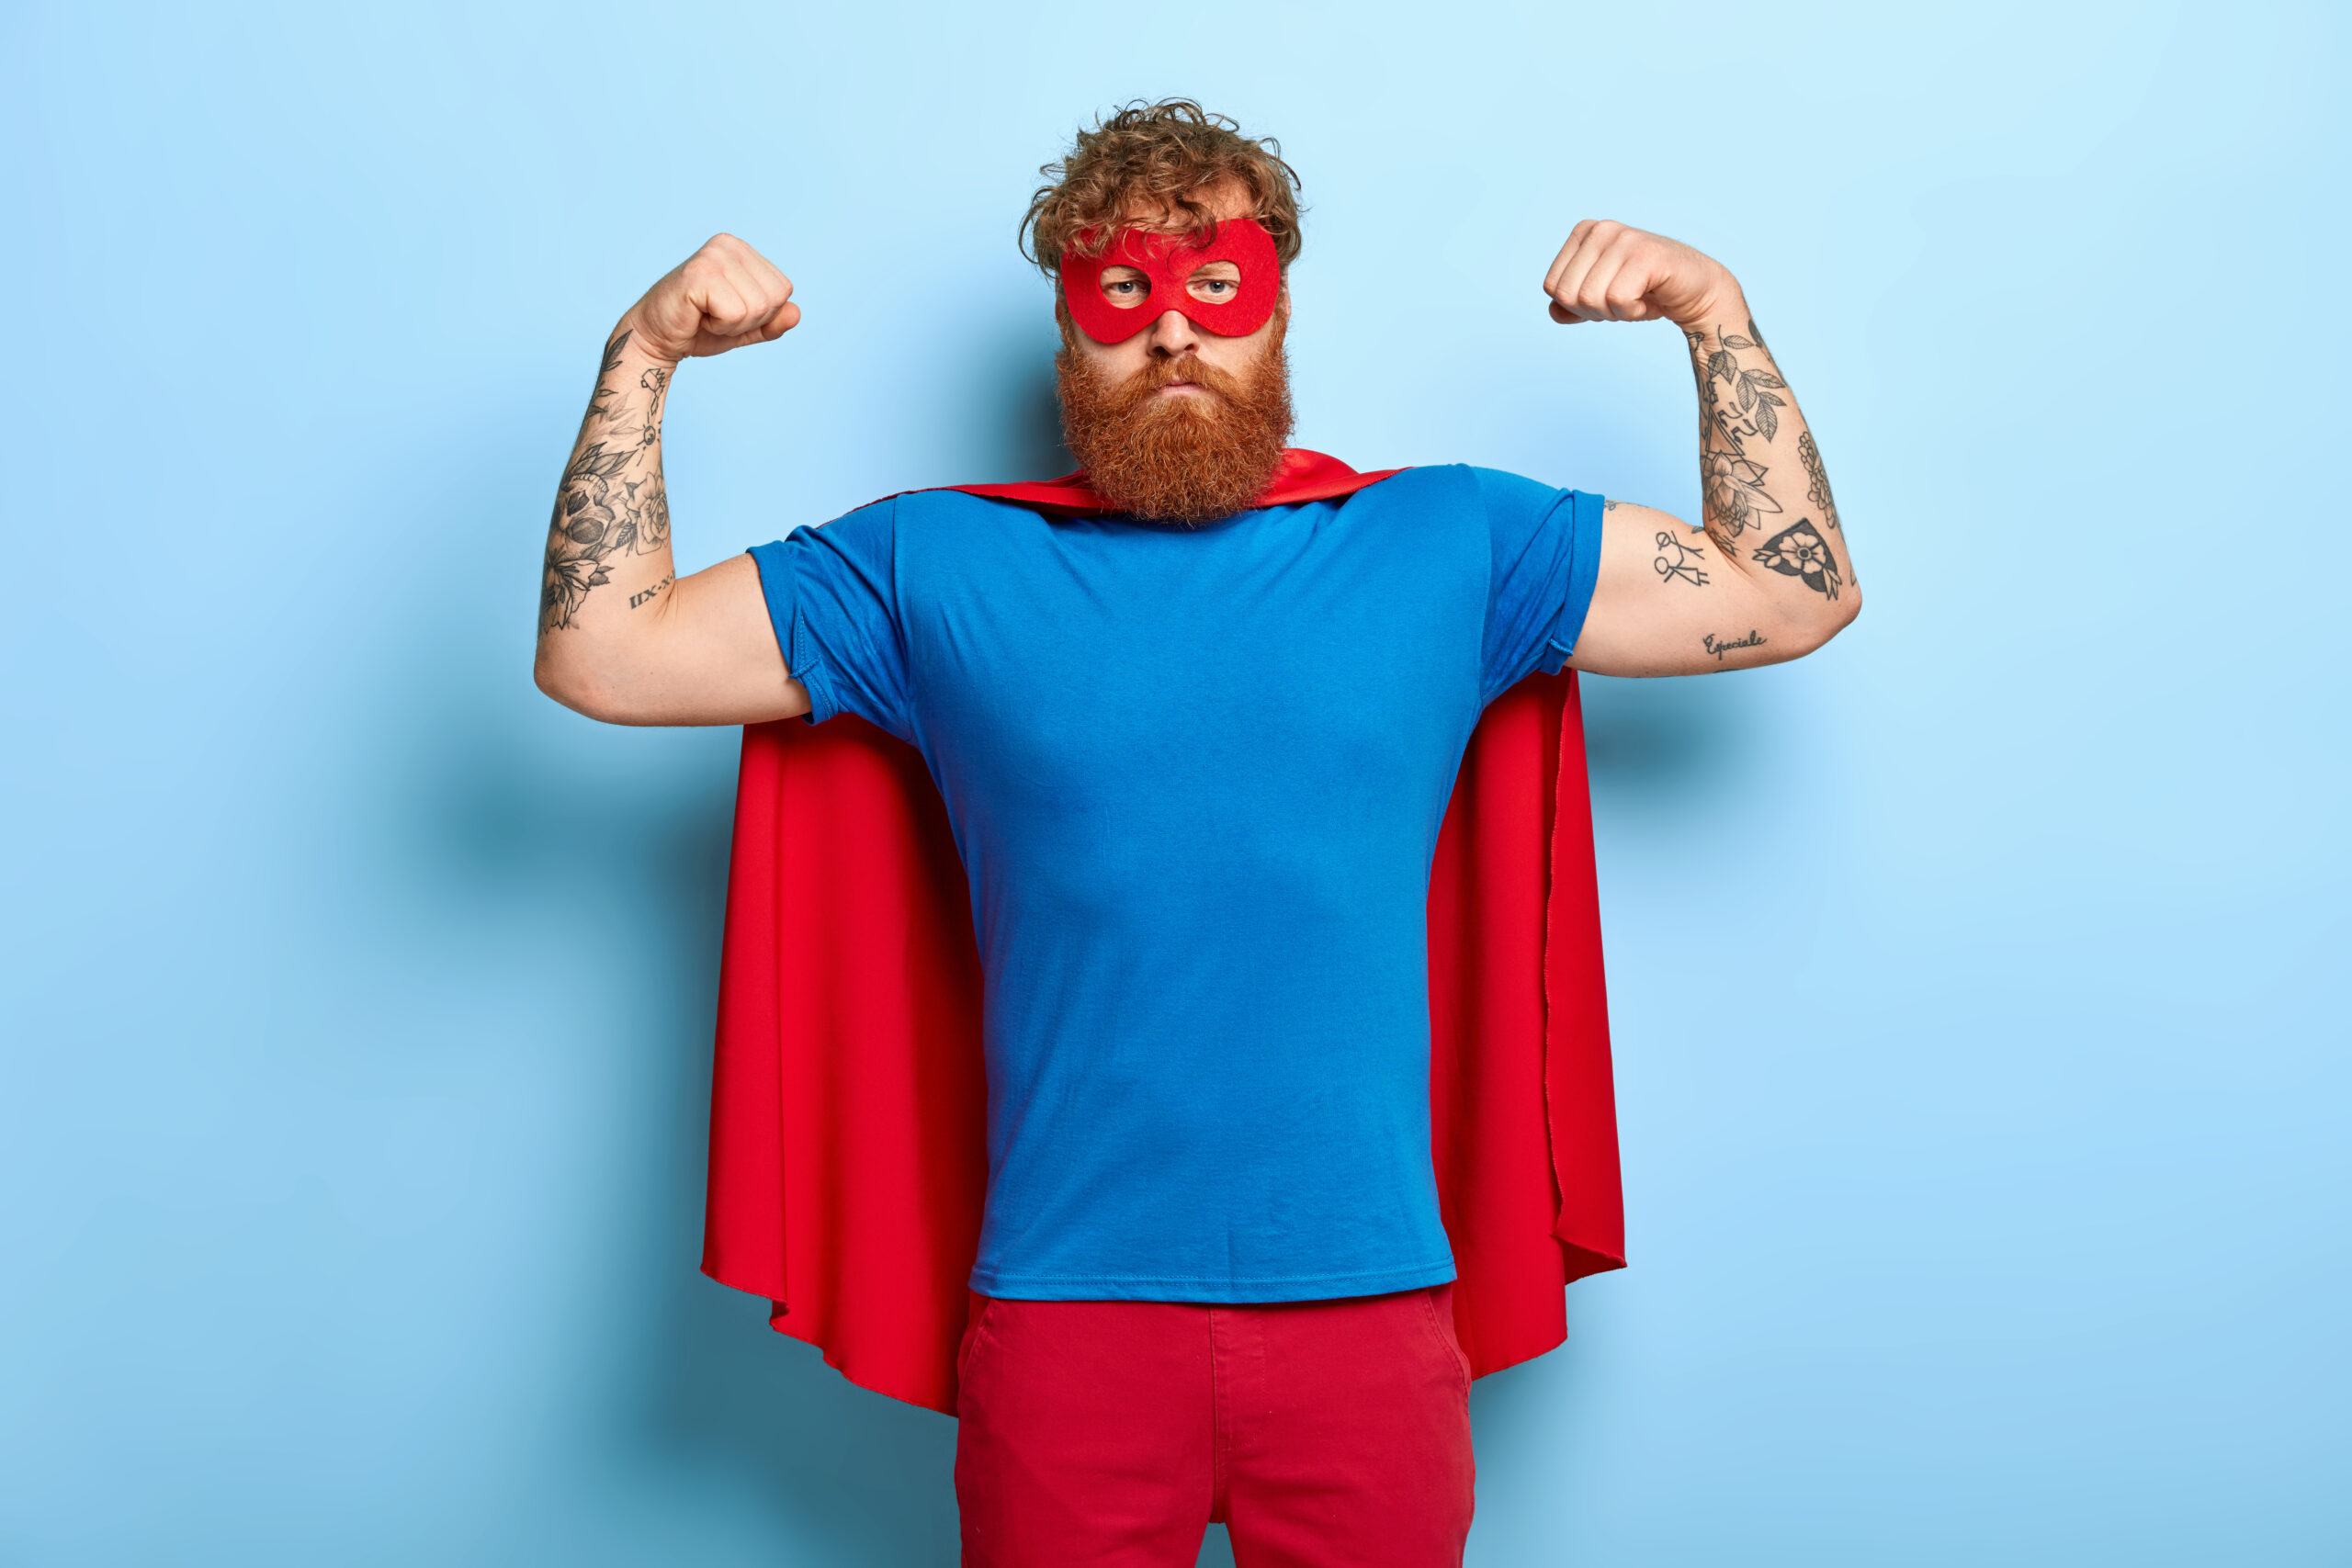 Successful hero wears red mask and cape, raises arms, shows biceps, demonstrates courage and strength, looks serious and confident, poses against blue wall. Real superhero ready to help you.